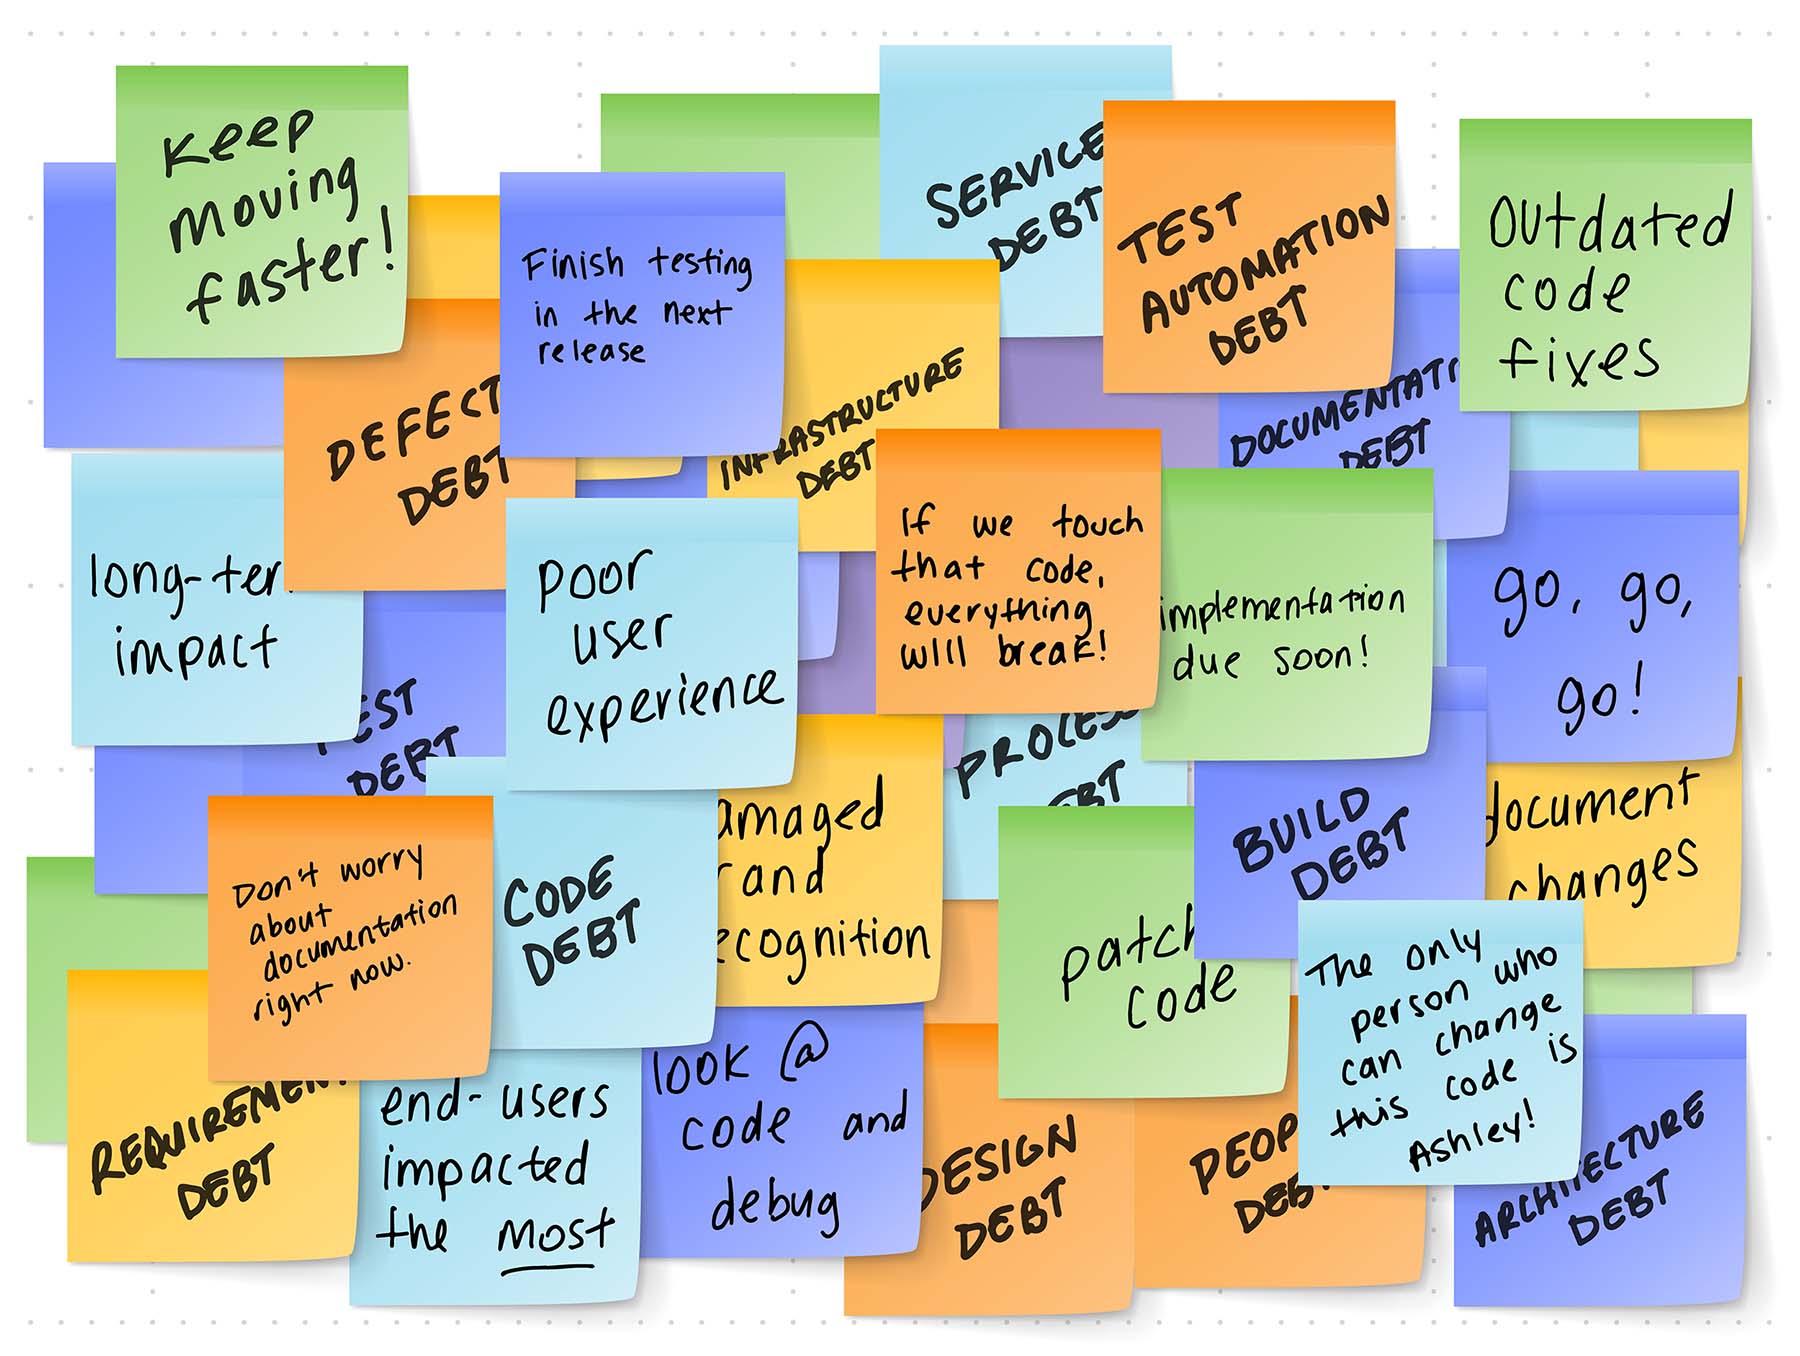 A surface covered in unorganized sticky notes that include tasks to remember while working through a digital process, such as patch code or document changes.